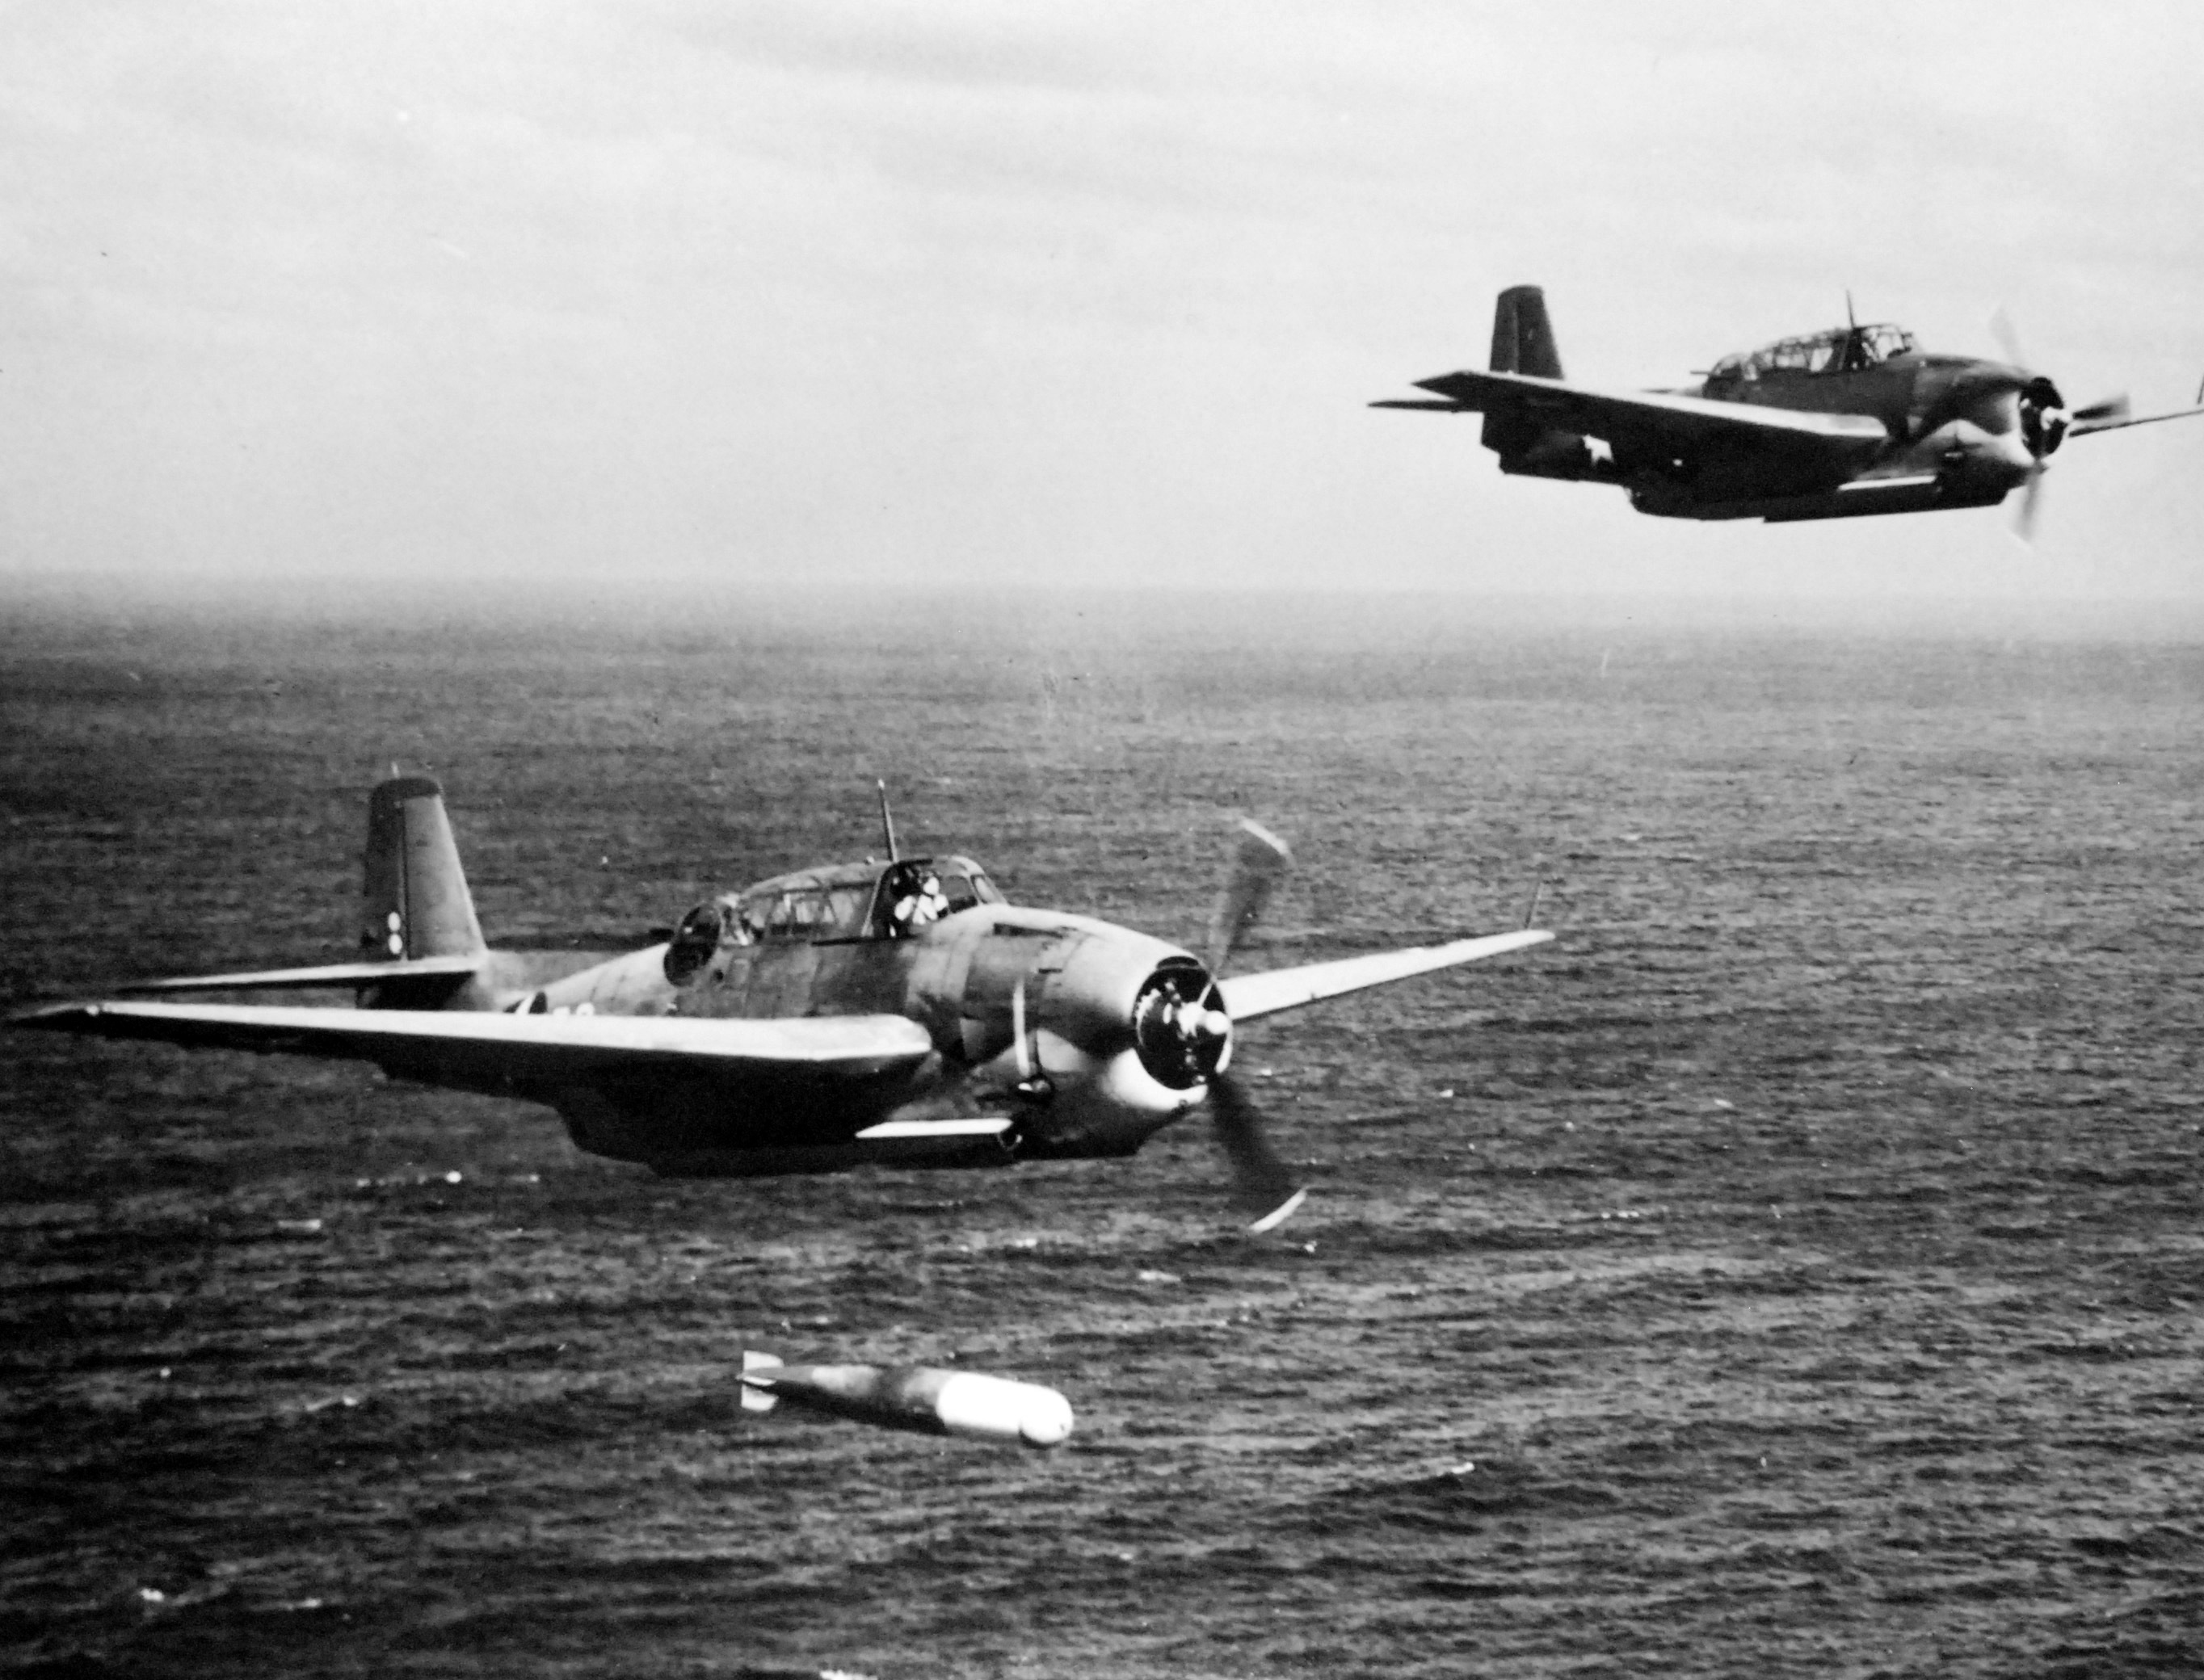 A training flight of TBF-1 Avengers lining up to drop practice torpedoes, late 1942, off the east coast of the United States. Photo 4 of 4.